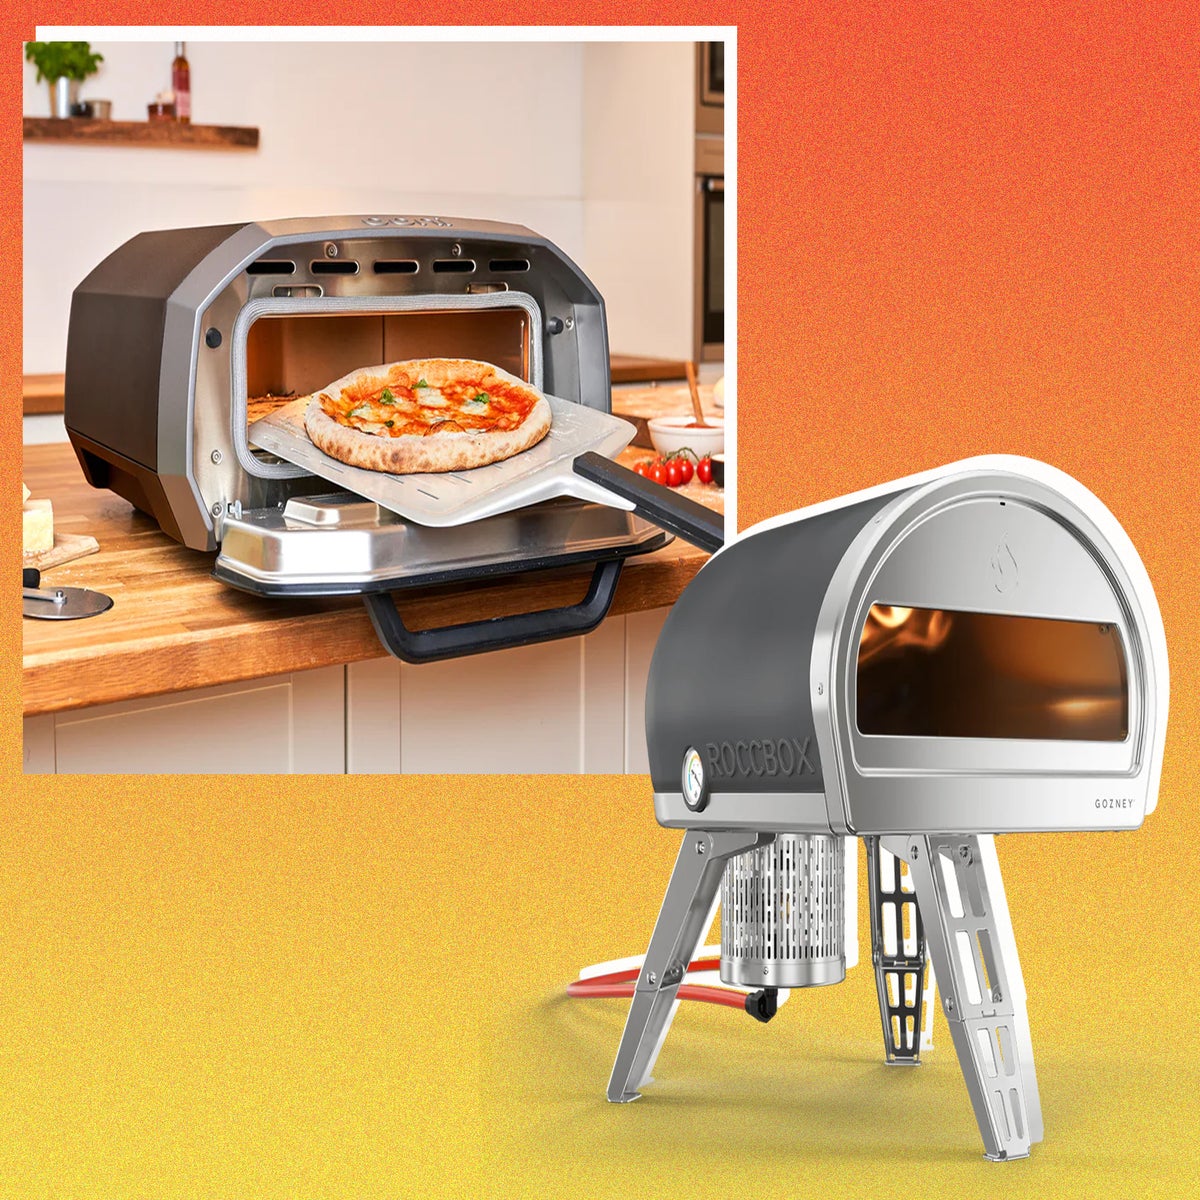 https://static.independent.co.uk/2023/05/30/10/PIZZA%20OVENS.jpg?width=1200&height=1200&fit=crop